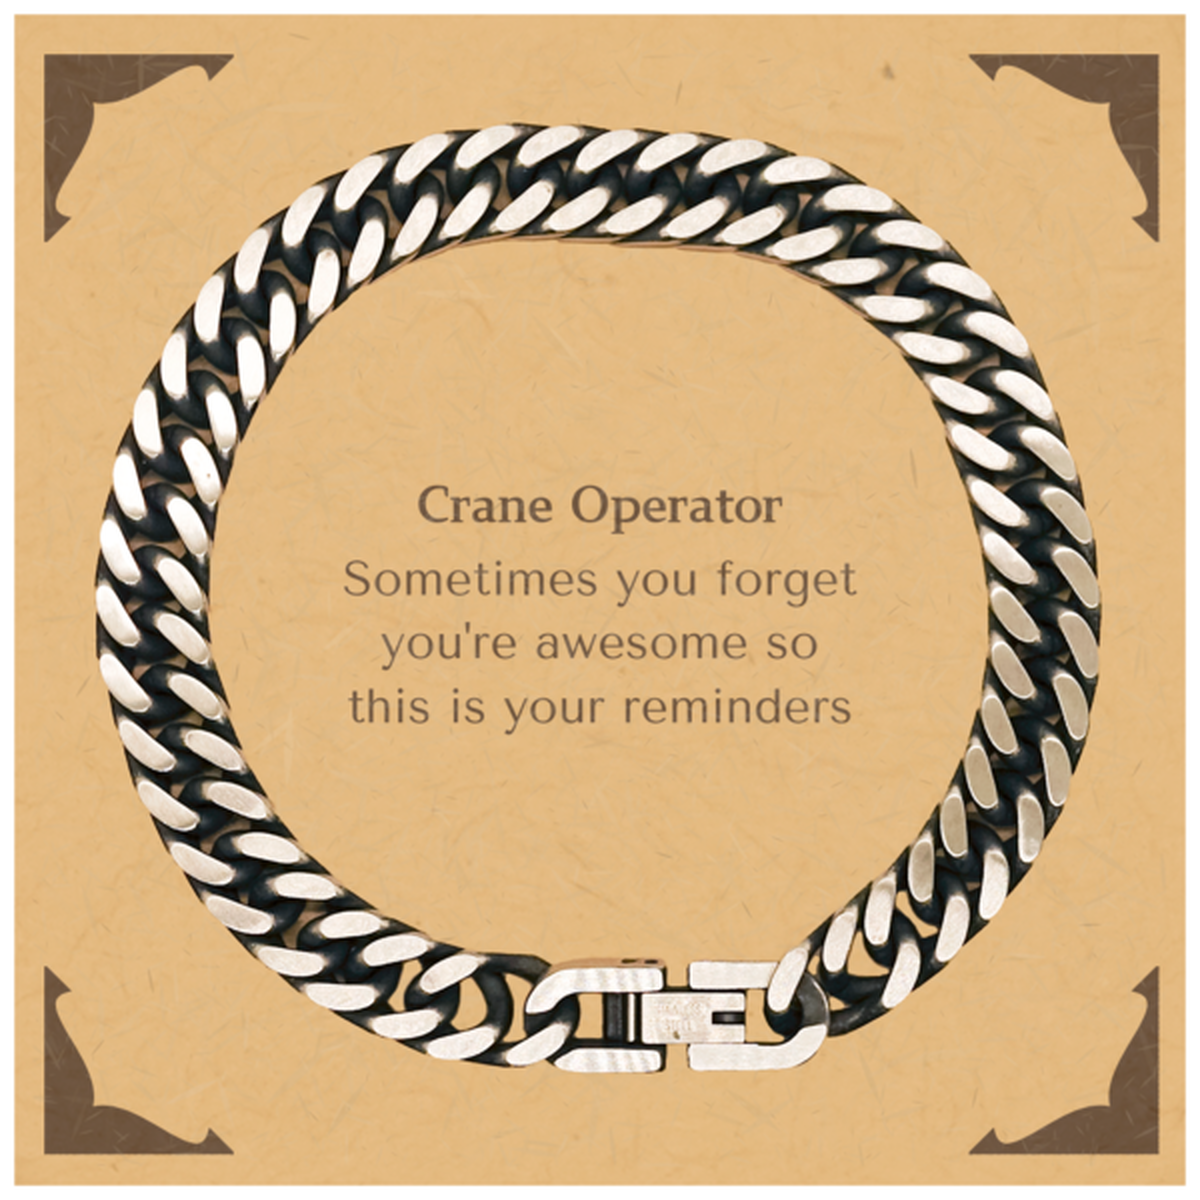 Sentimental Crane Operator Cuban Link Chain Bracelet, Crane Operator Sometimes you forget you're awesome so this is your reminders, Graduation Christmas Birthday Gifts for Crane Operator, Men, Women, Coworkers